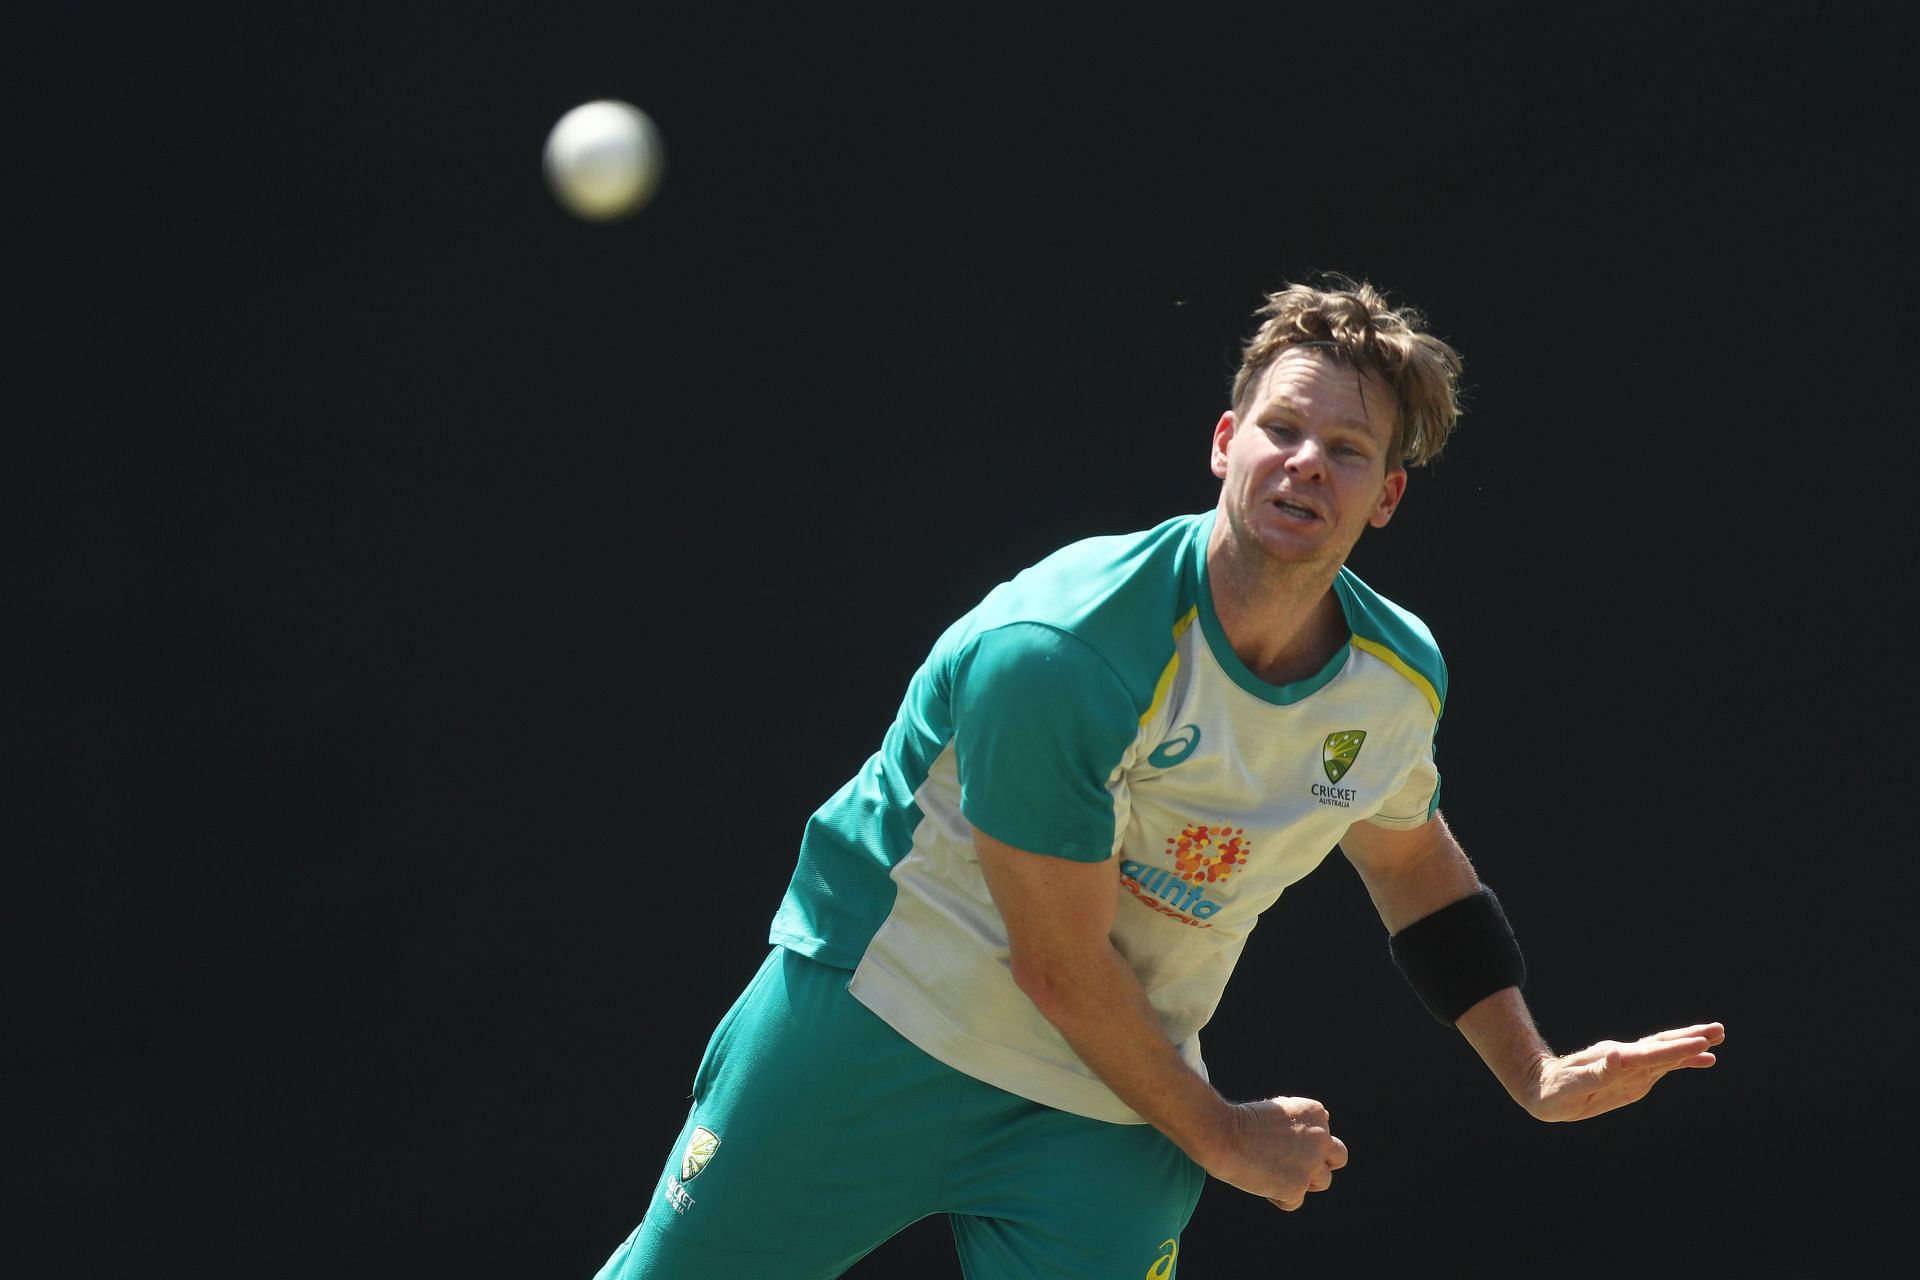 Smith is playing the deputy skipper's role for Australia's Test team (Image courtesy: Getty)